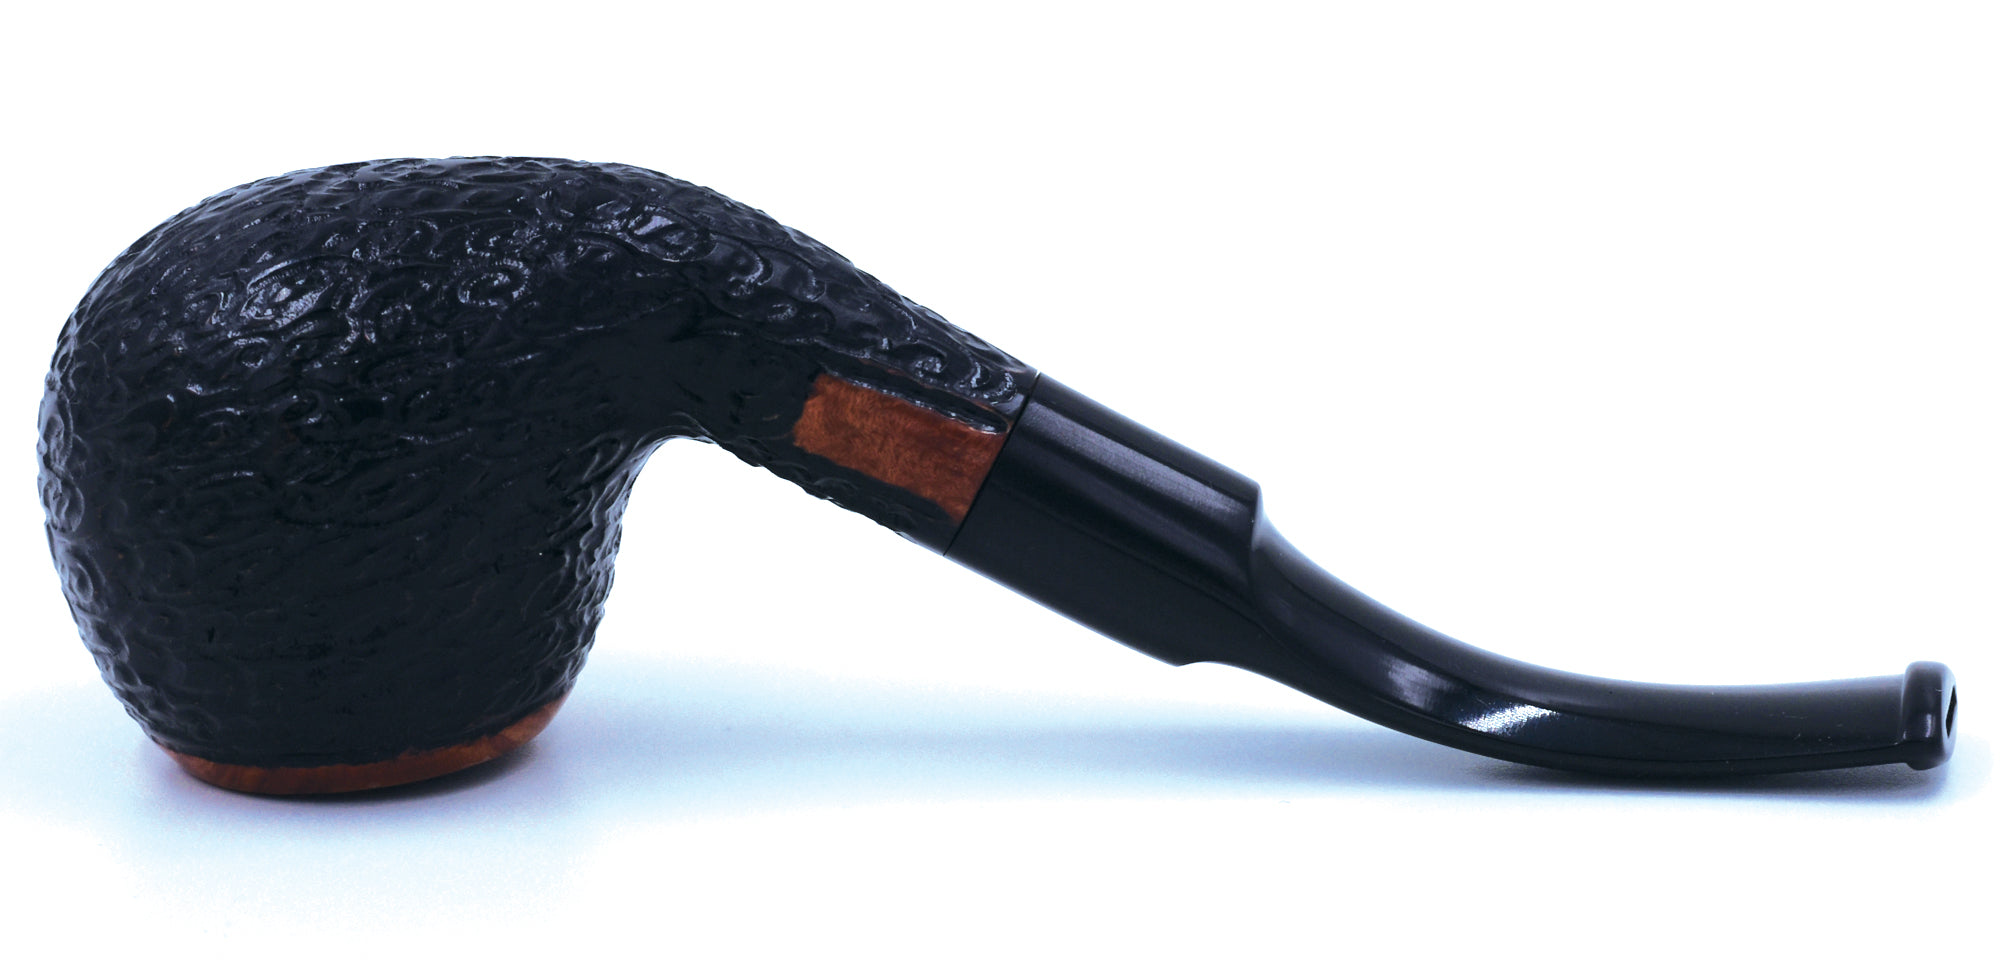 LEGENDEX® TOSCANINI* 9 MM Filtered Briar Smoking Pipe Made In Italy 01-08-406